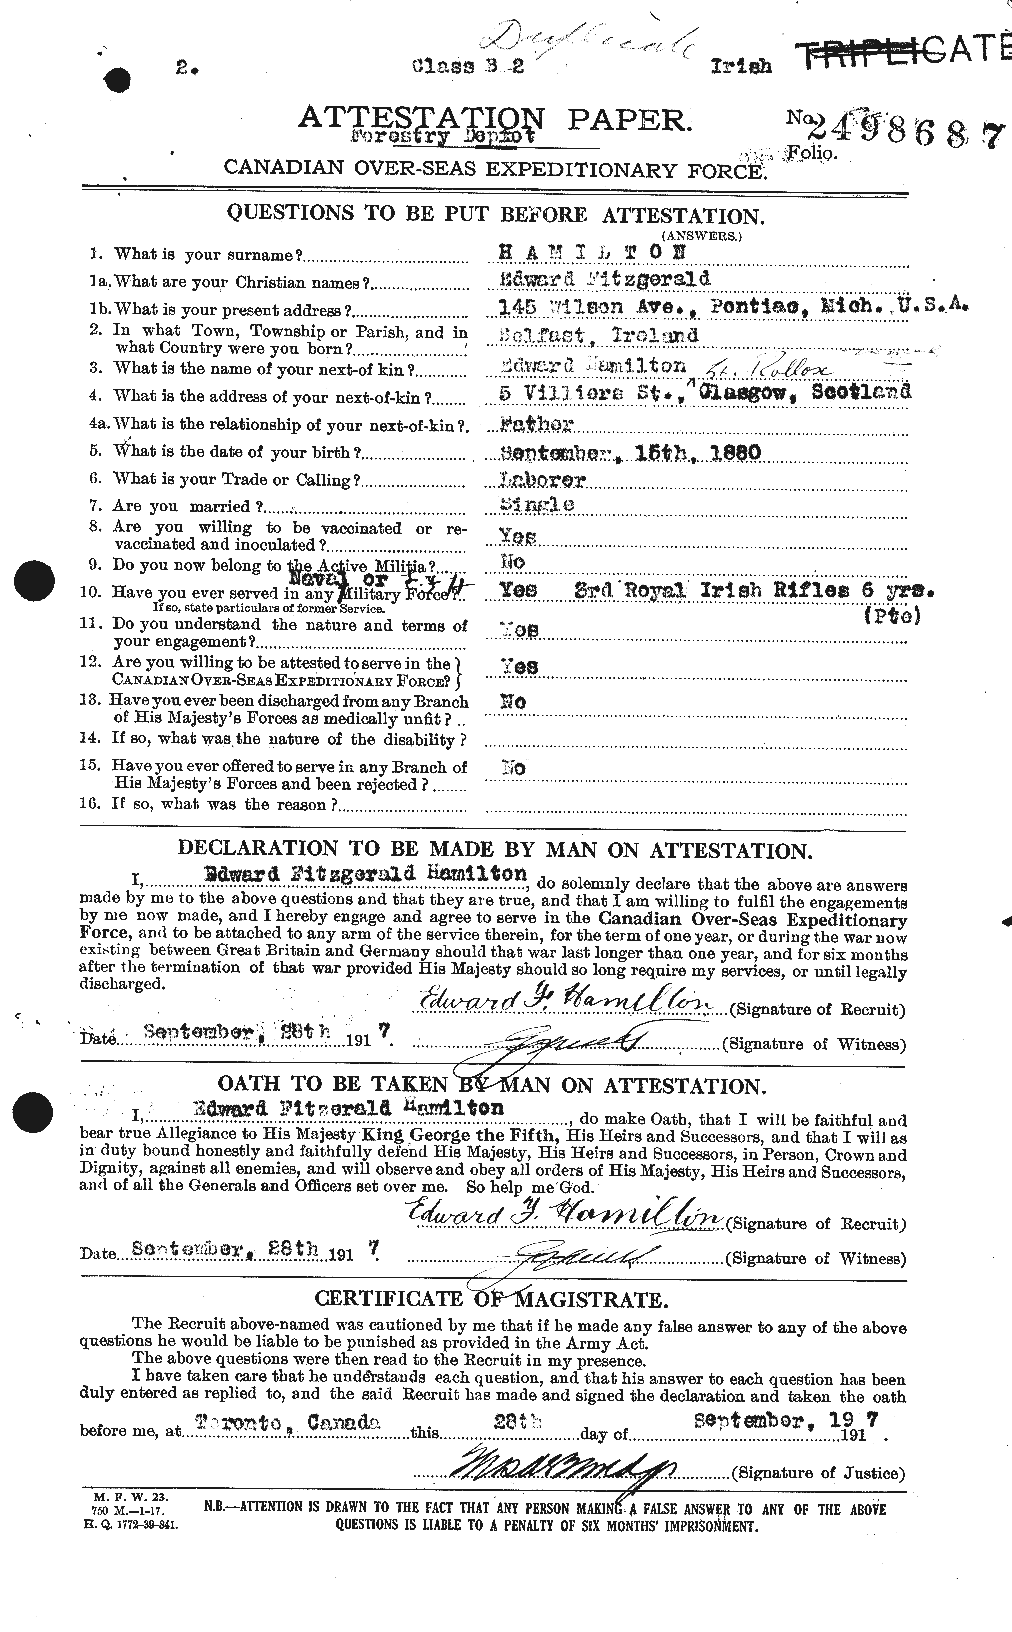 Personnel Records of the First World War - CEF 375376a